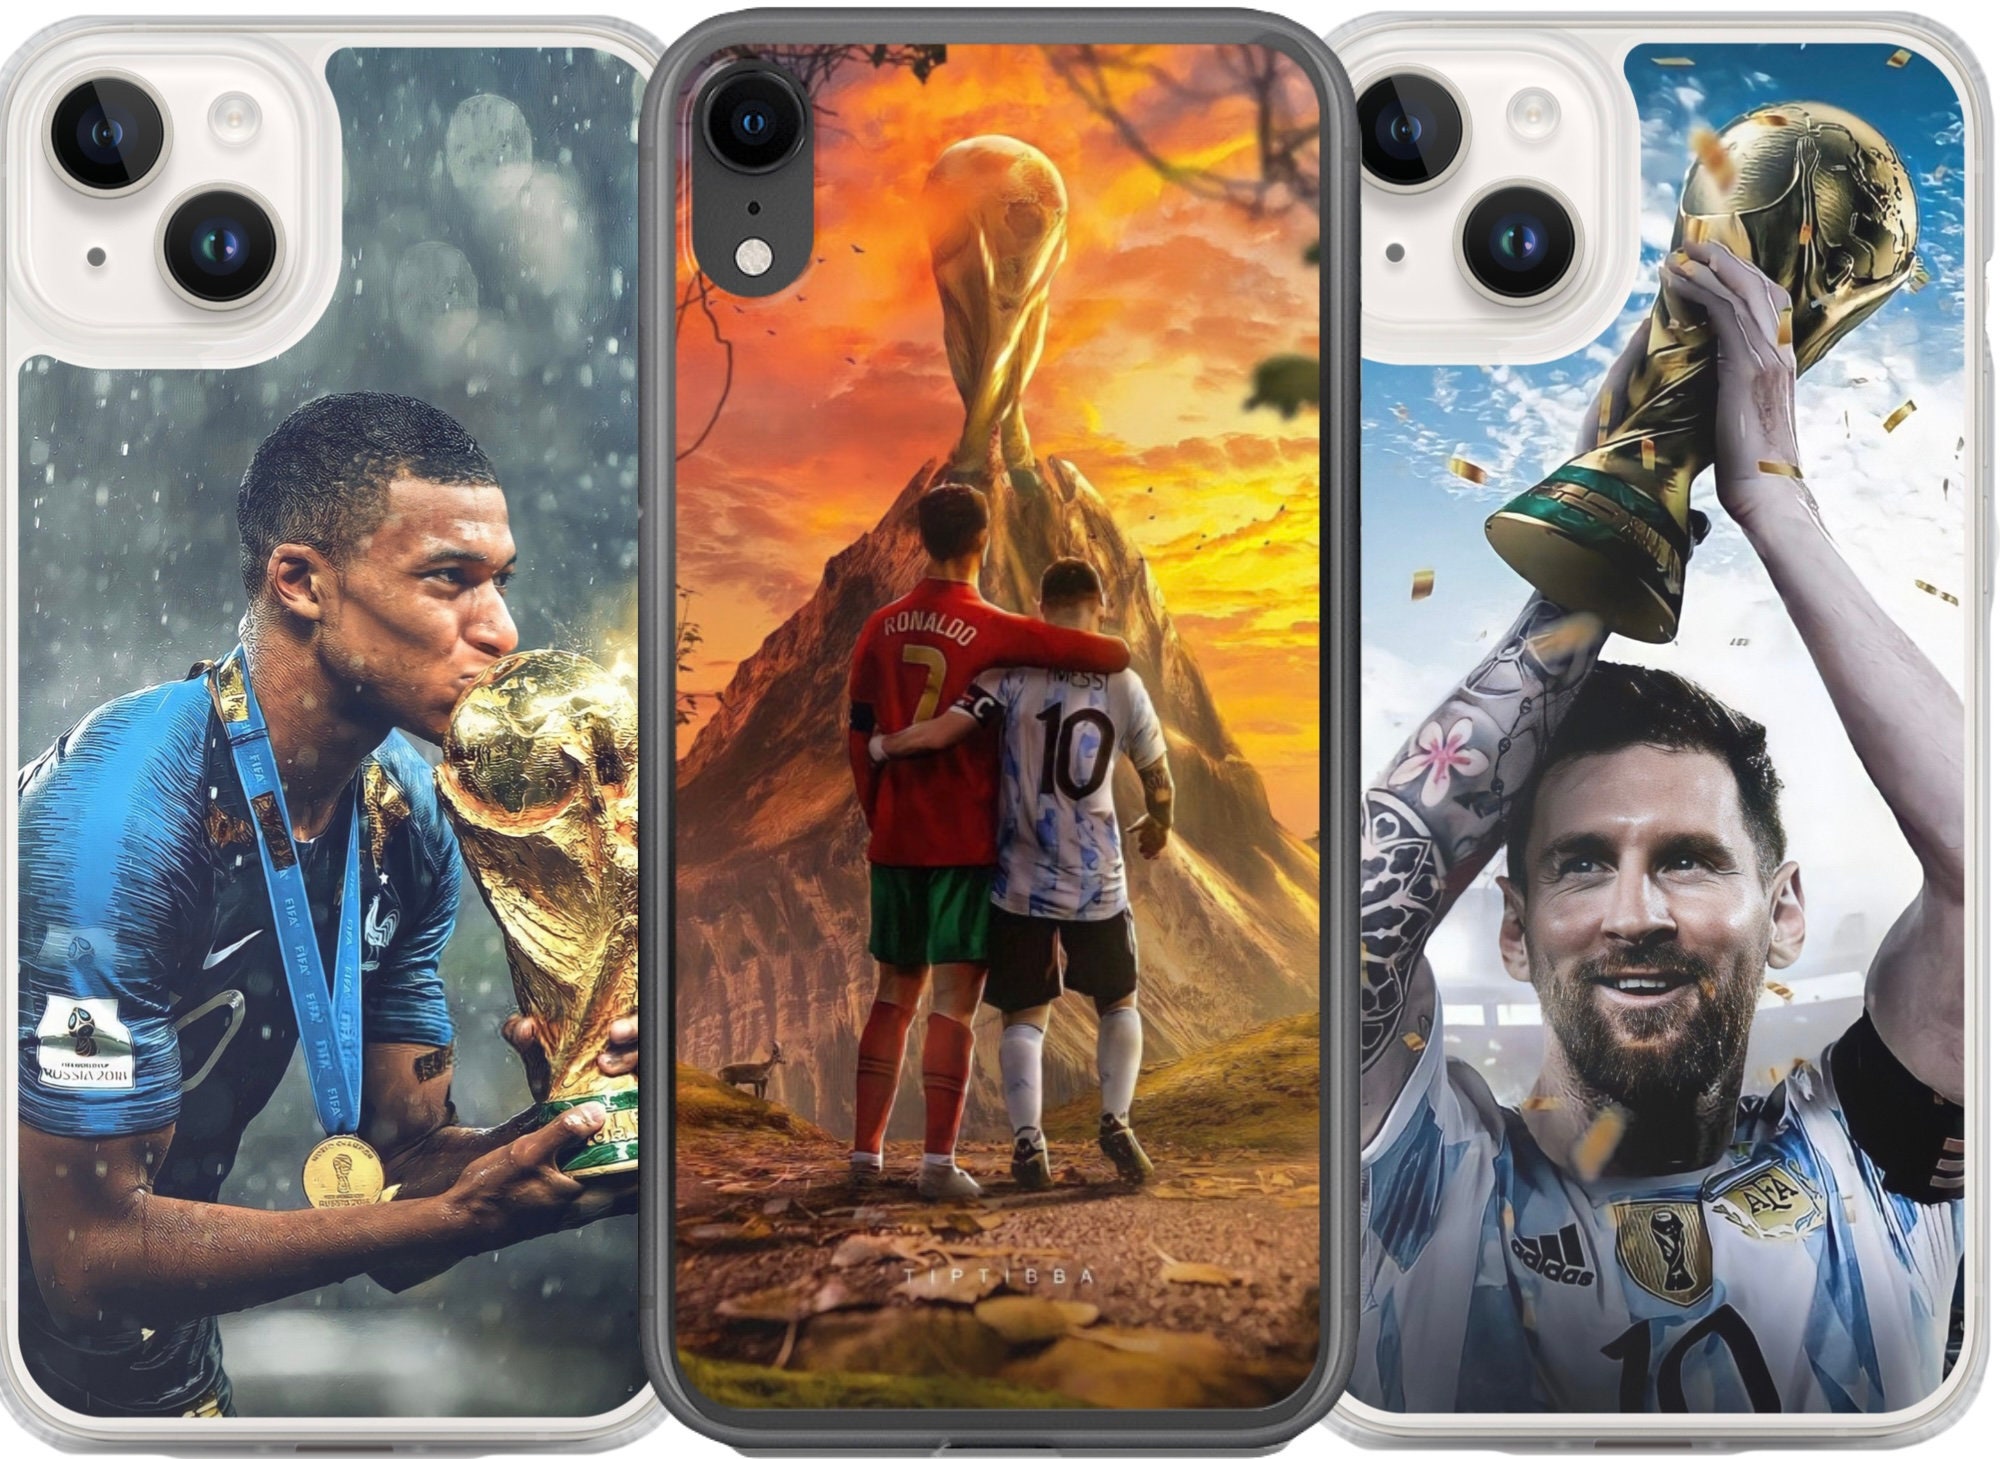 World Cup 2022 Qatar by fightfrontier  Iphone cases, Phone case design,  Case